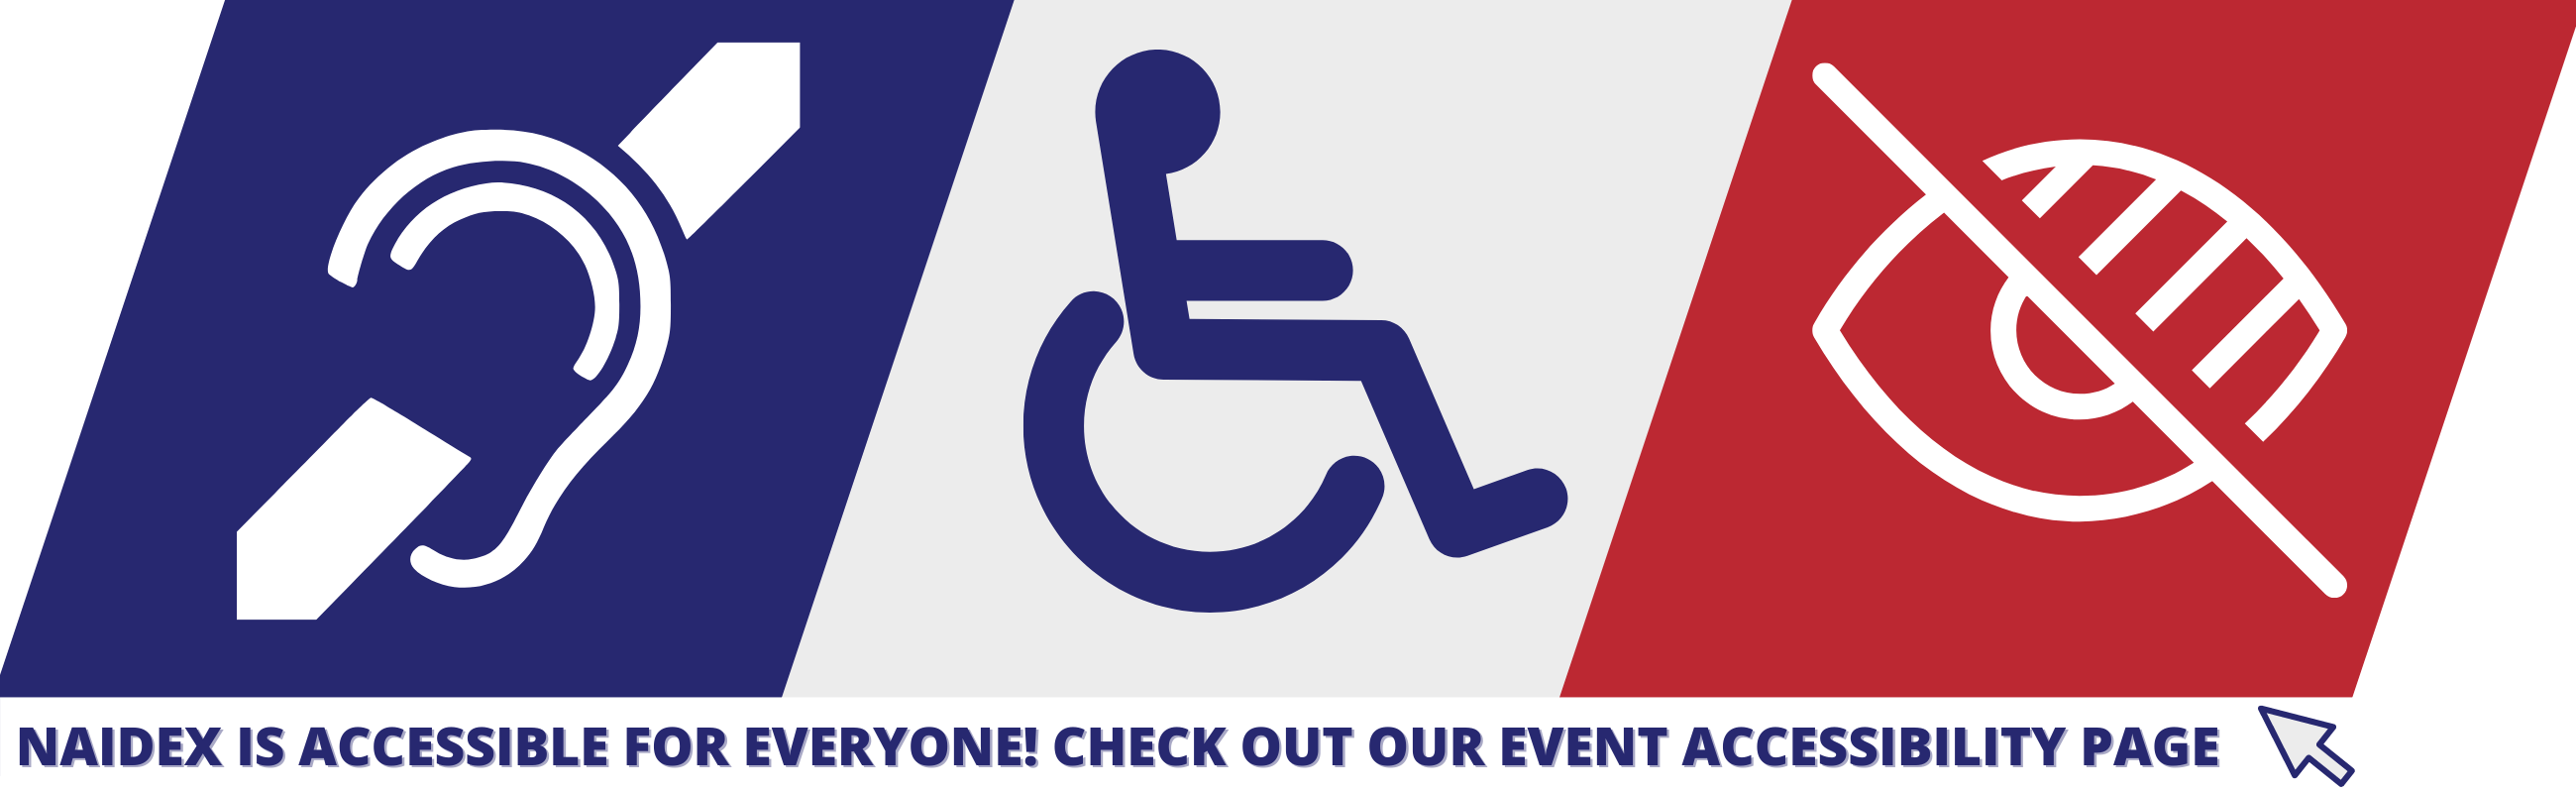 Naidex is accessible for everyone. check out our event accessibility page